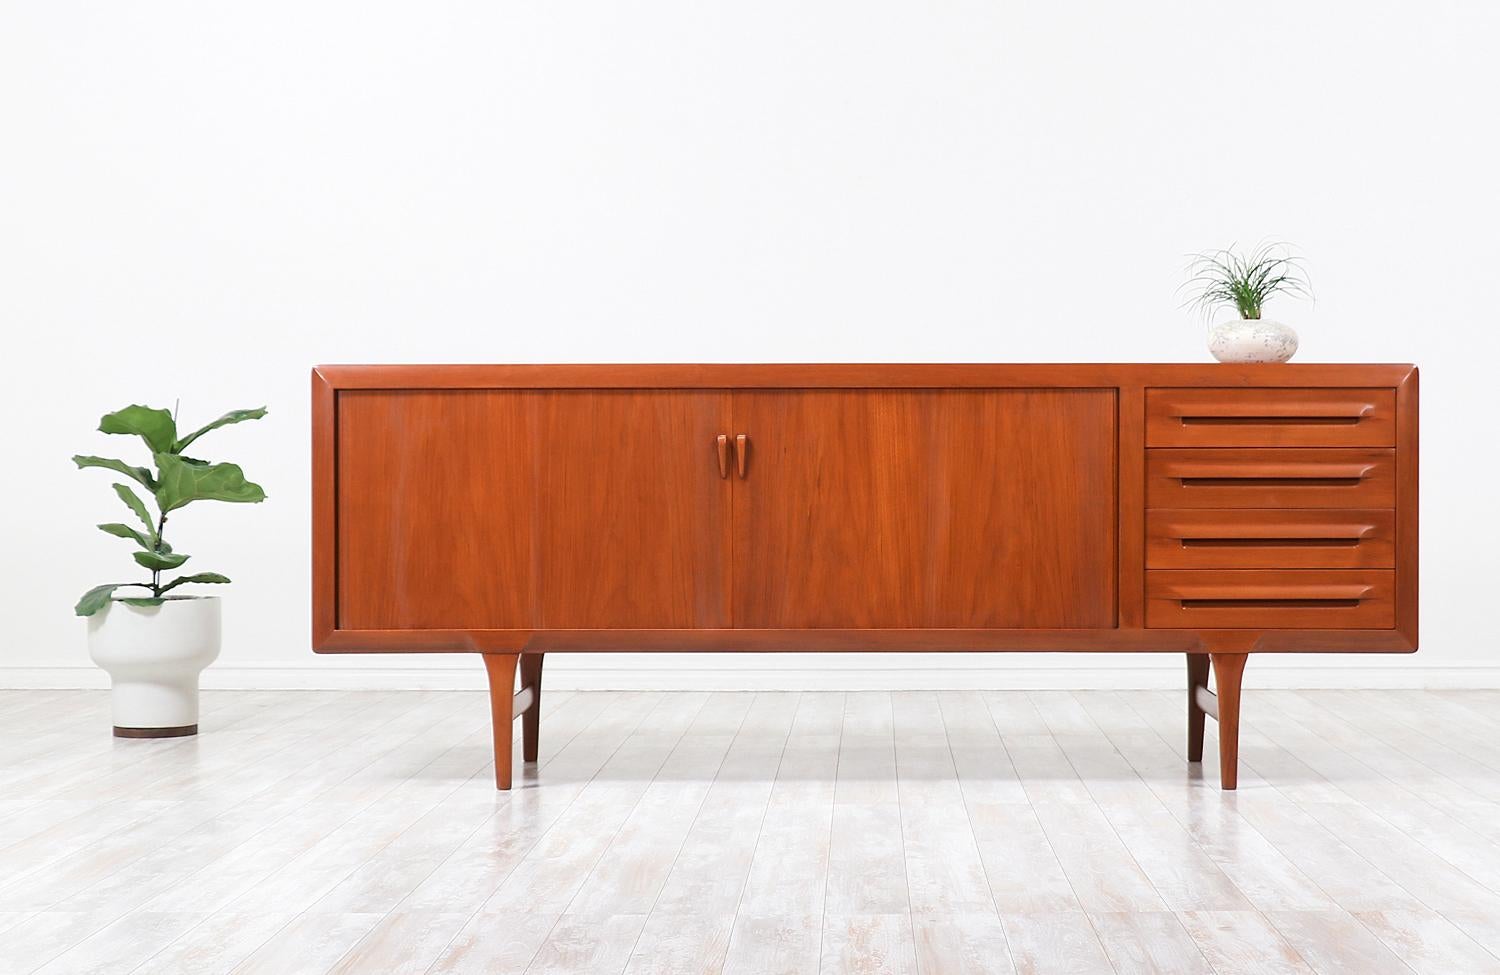 Tambour door credenza designed by Ib-Kofod Larsen for Faarup Møbelfabrik in Denmark, circa 1950s. Impeccably crafted in teak wood, this beautiful credenza shows an intricate wood grain throughout and features smoothly functioning tambour doors that